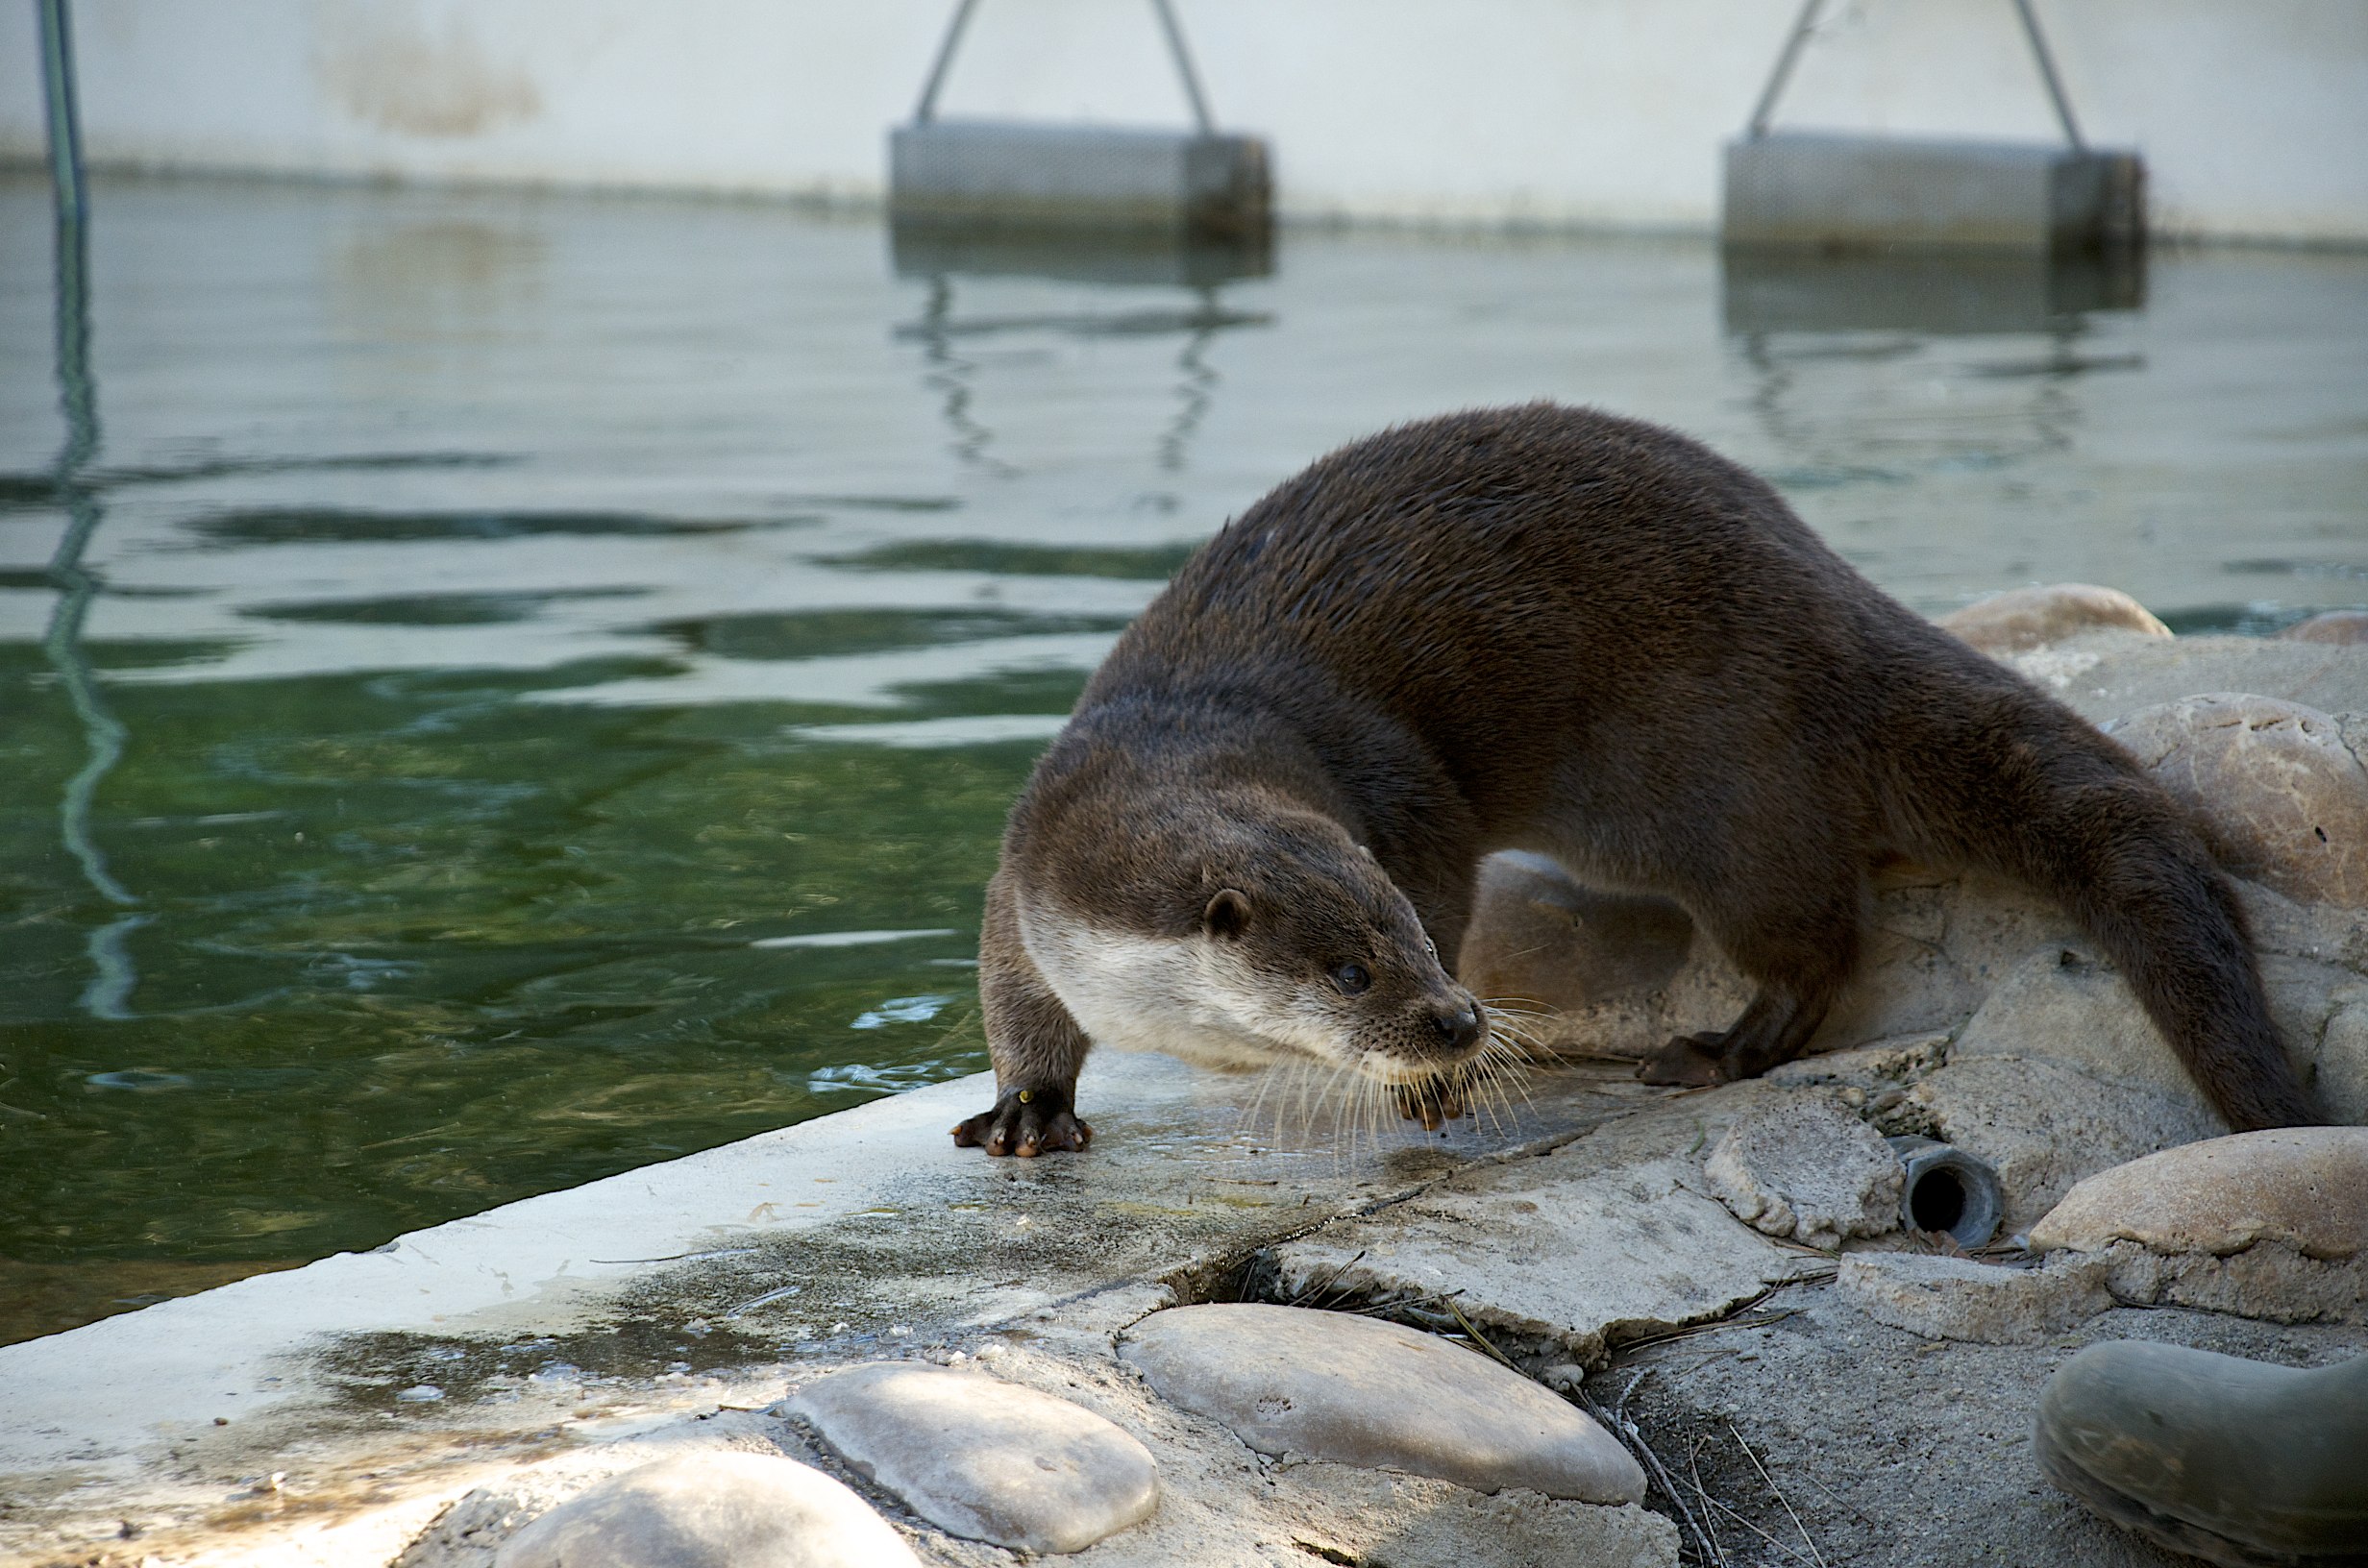 Otter Concentrates Very Hard on Nomming His Food 2